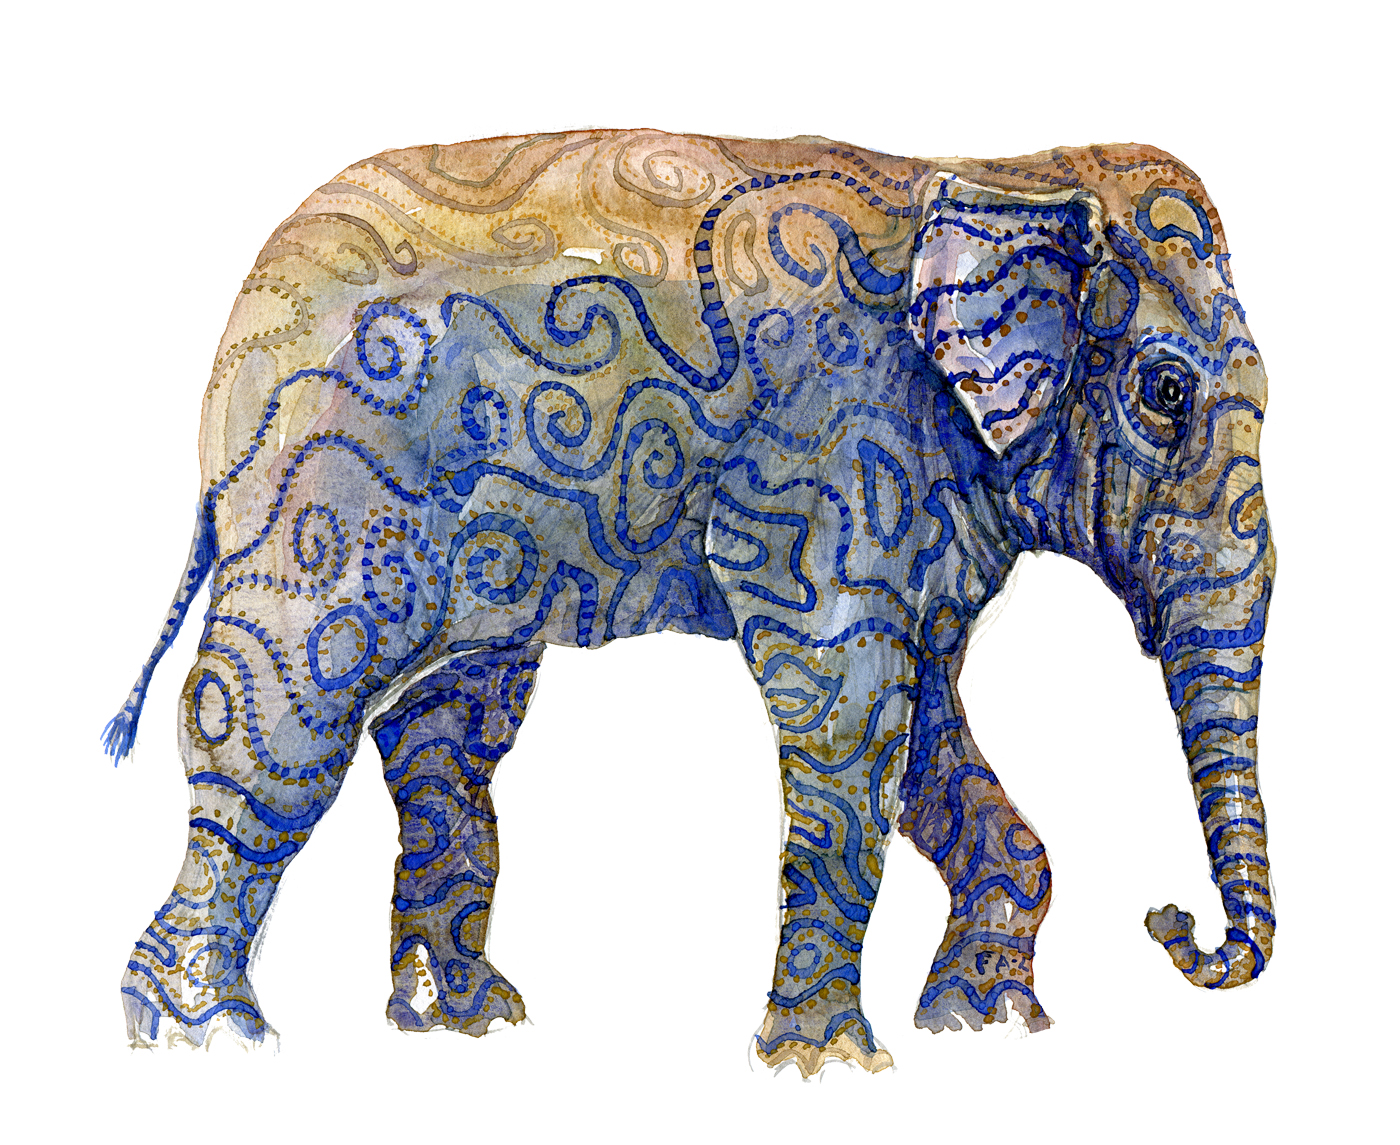 Watercolor by Frits Ahlefeldt, Indian elephant with stripes